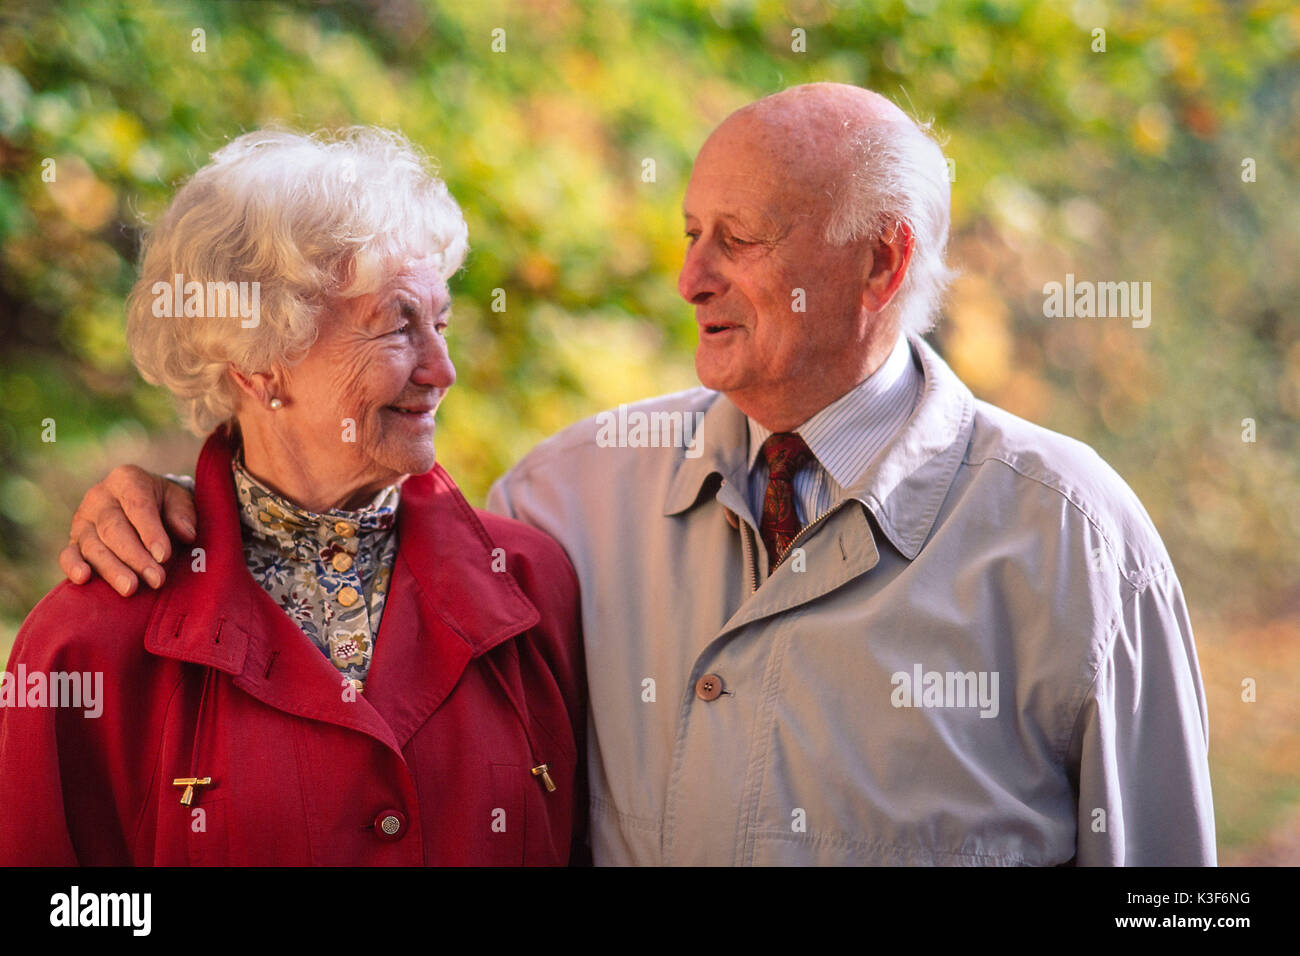 Old married couple has a look, man places his arm around the woman Stock Photo